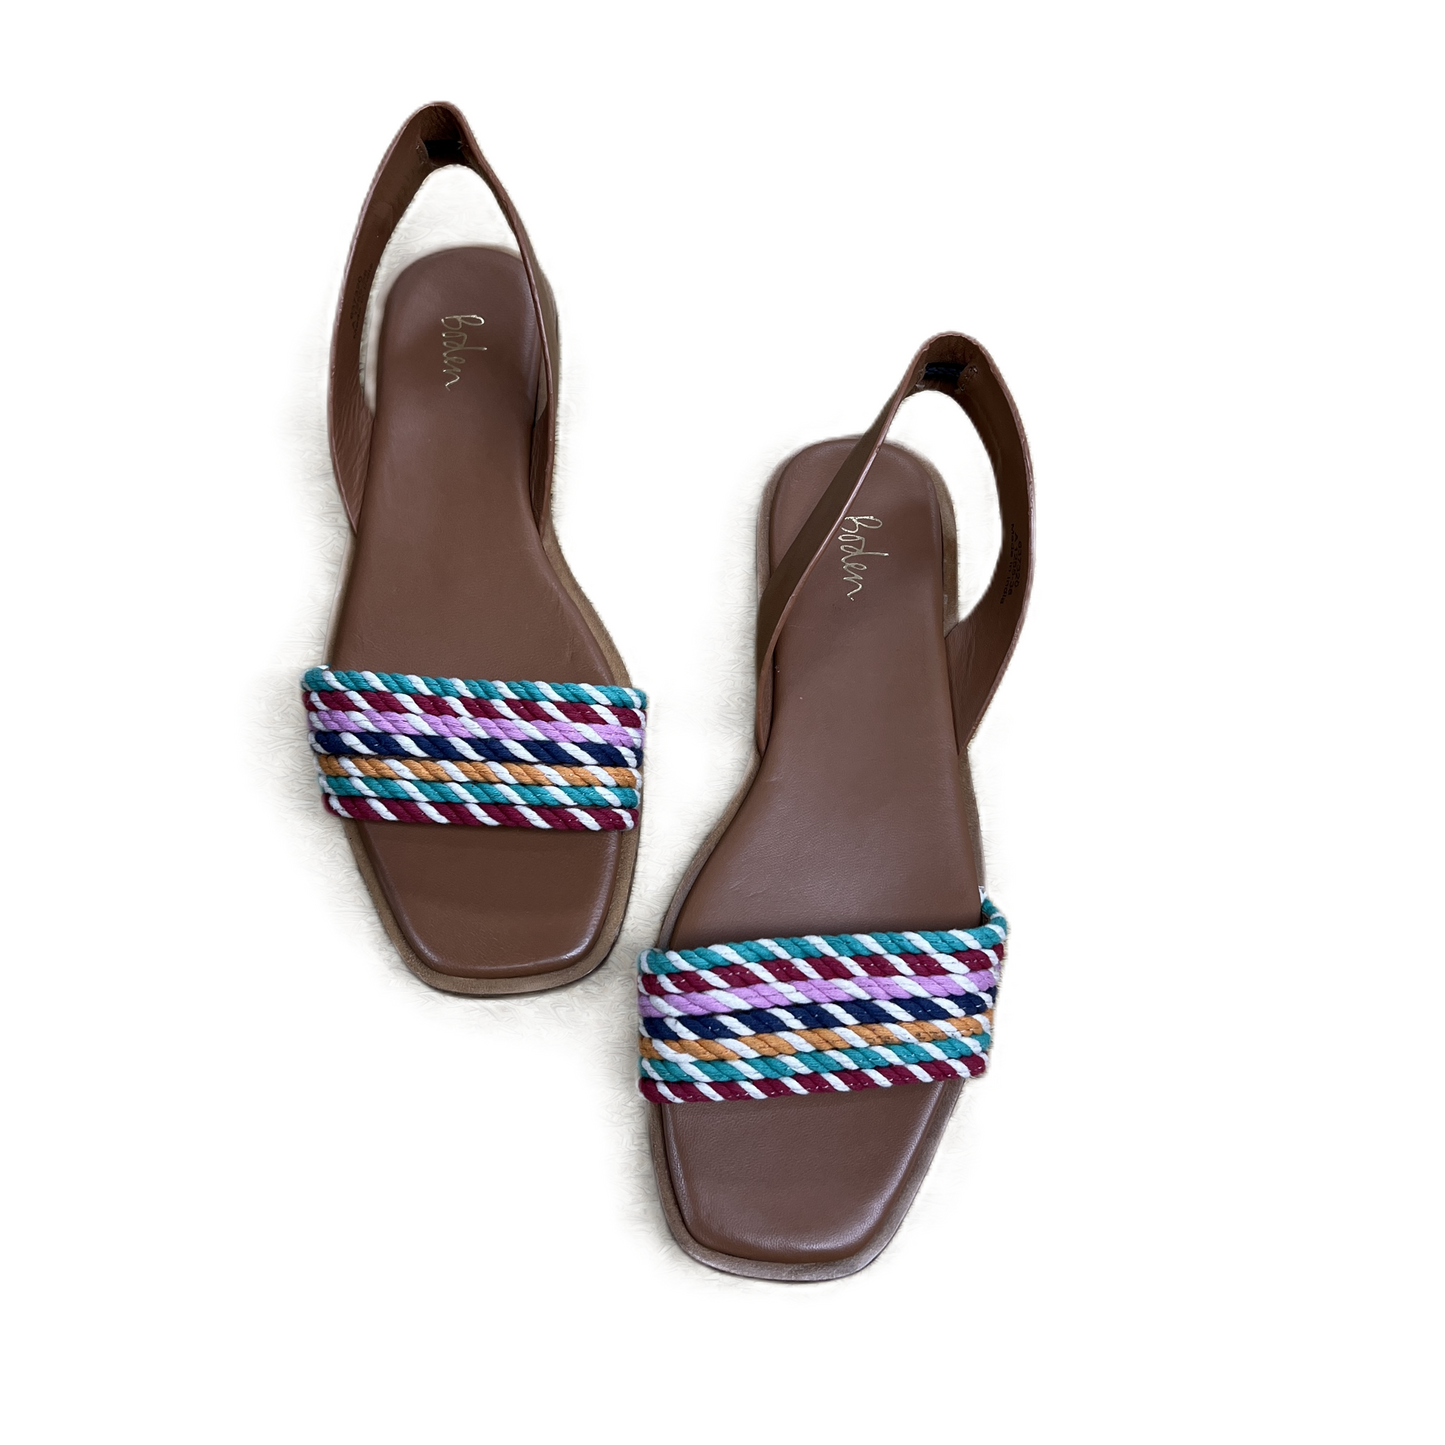 Sandals Flats By Boden  Size: 7.5